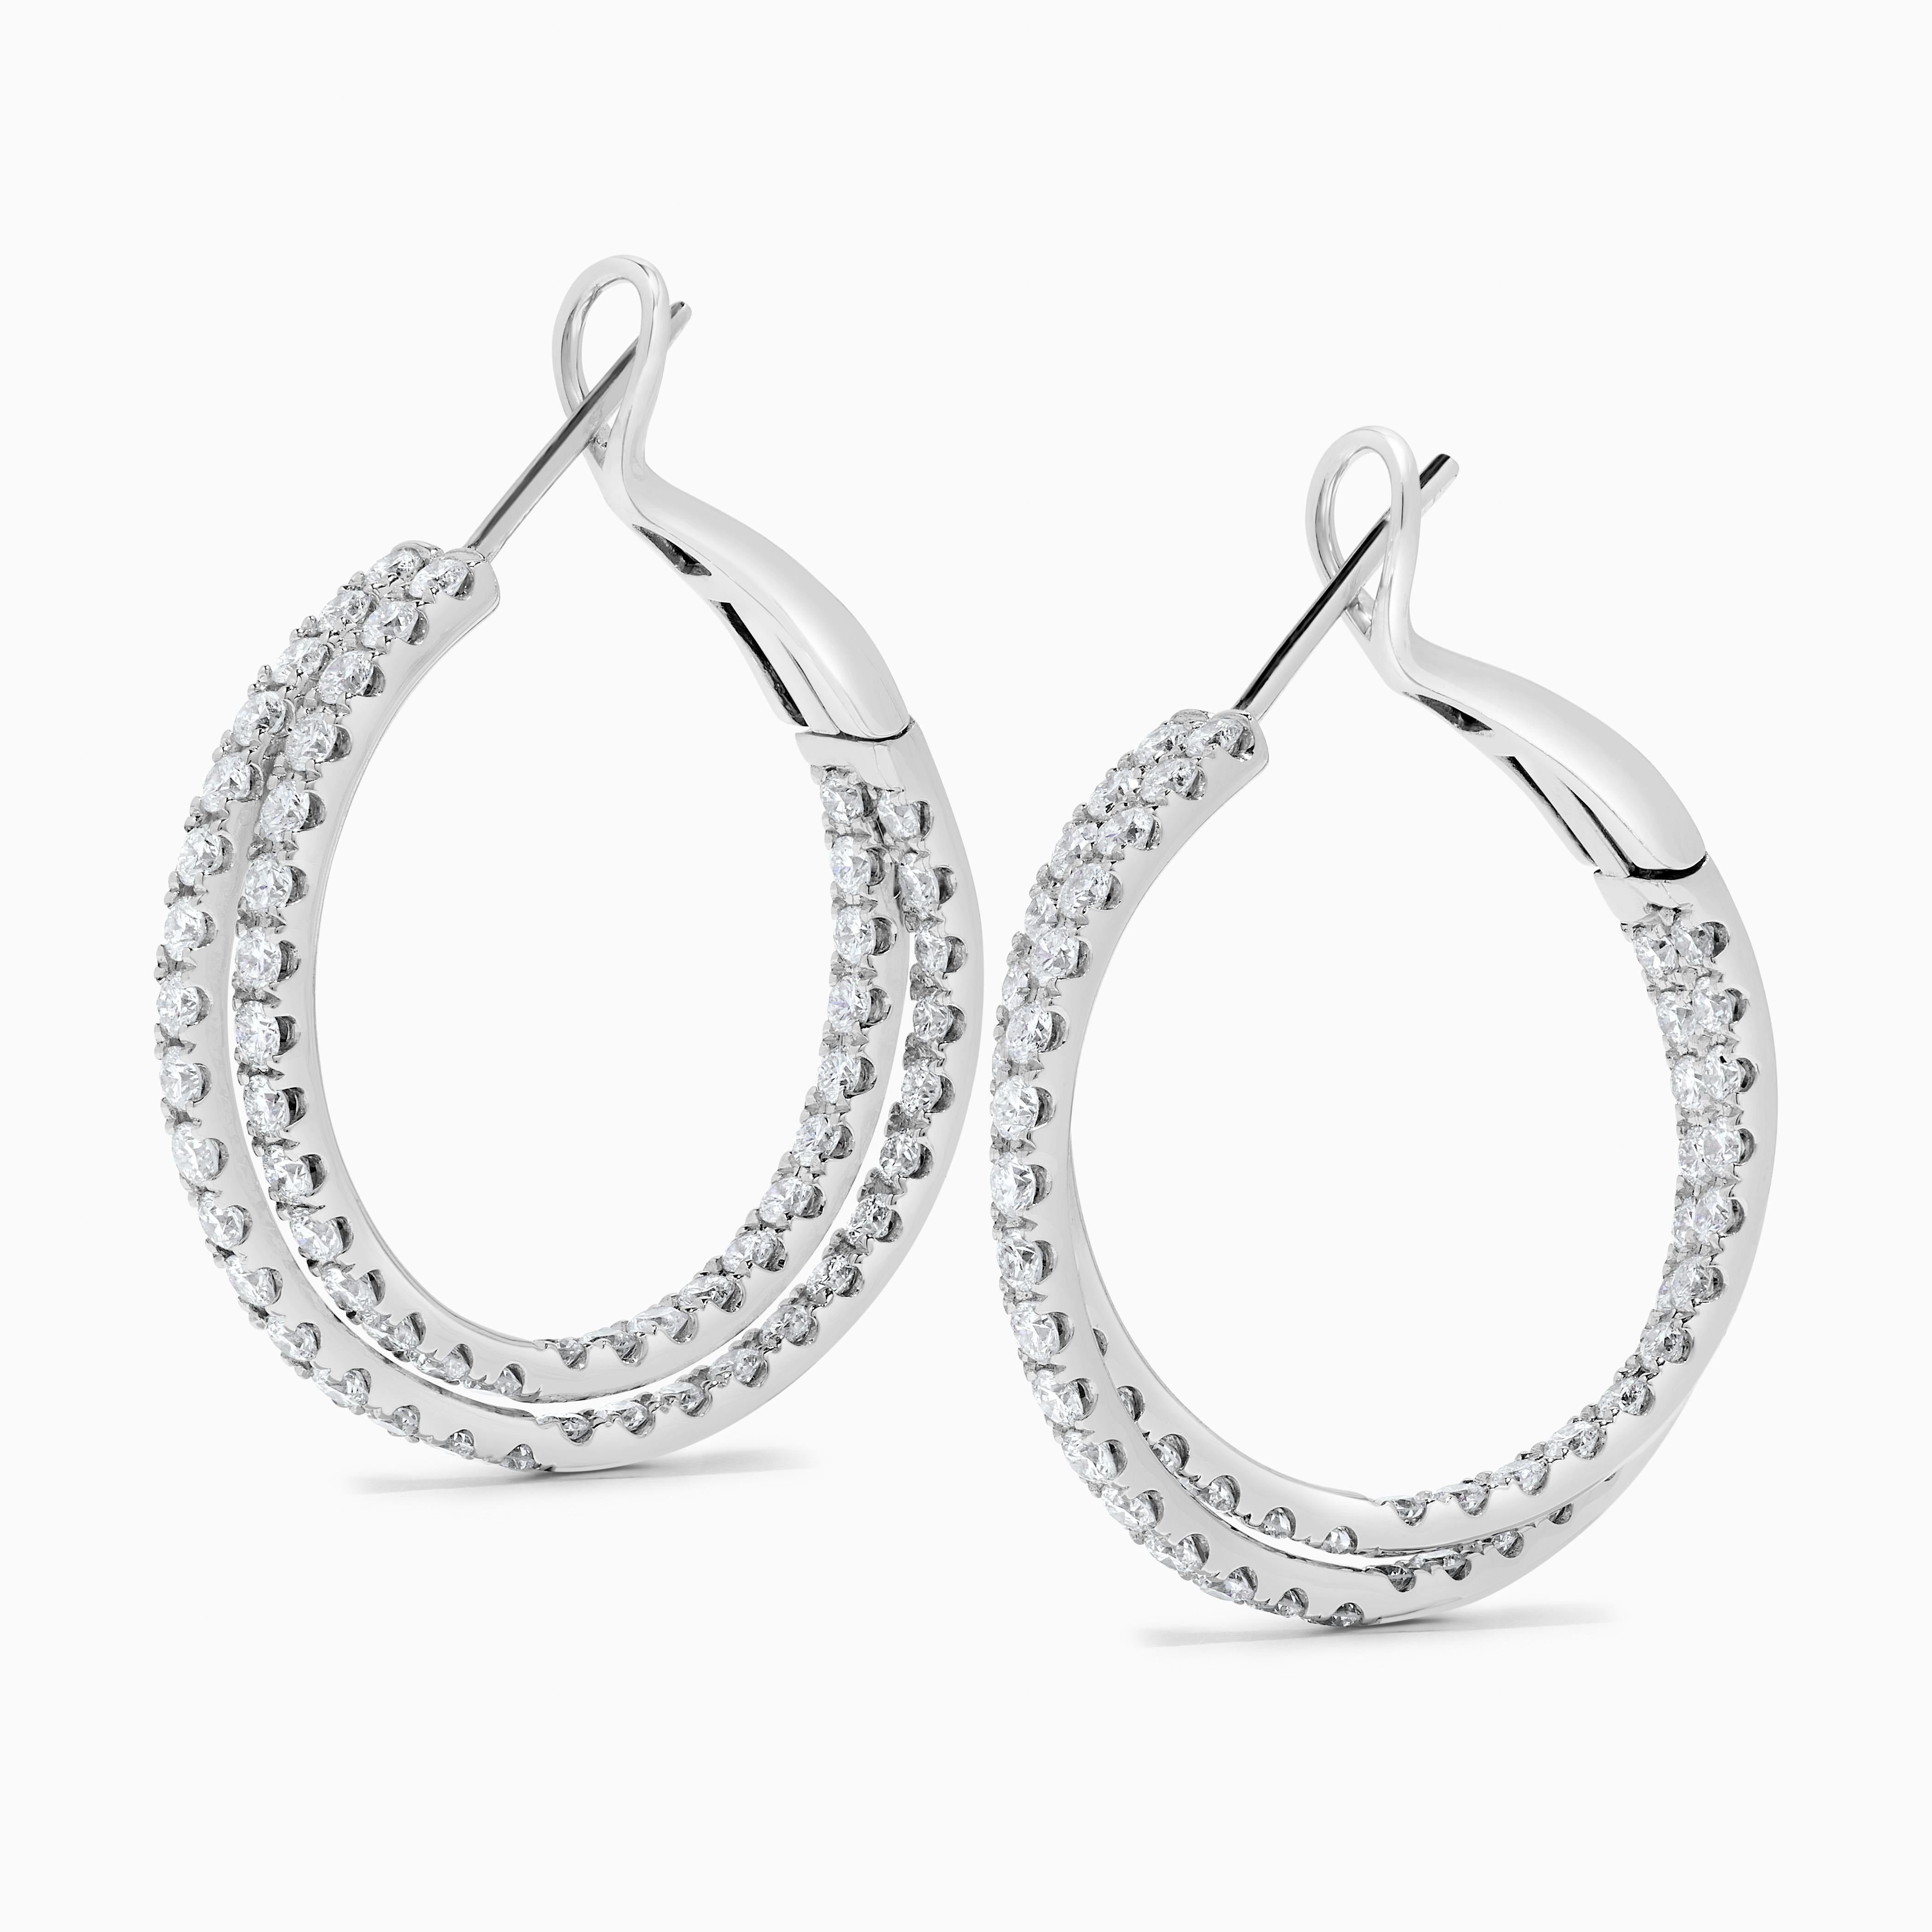 Round Cut Natural White Round Diamond 2.62 Carat TW White Gold Hoop Earrings For Sale